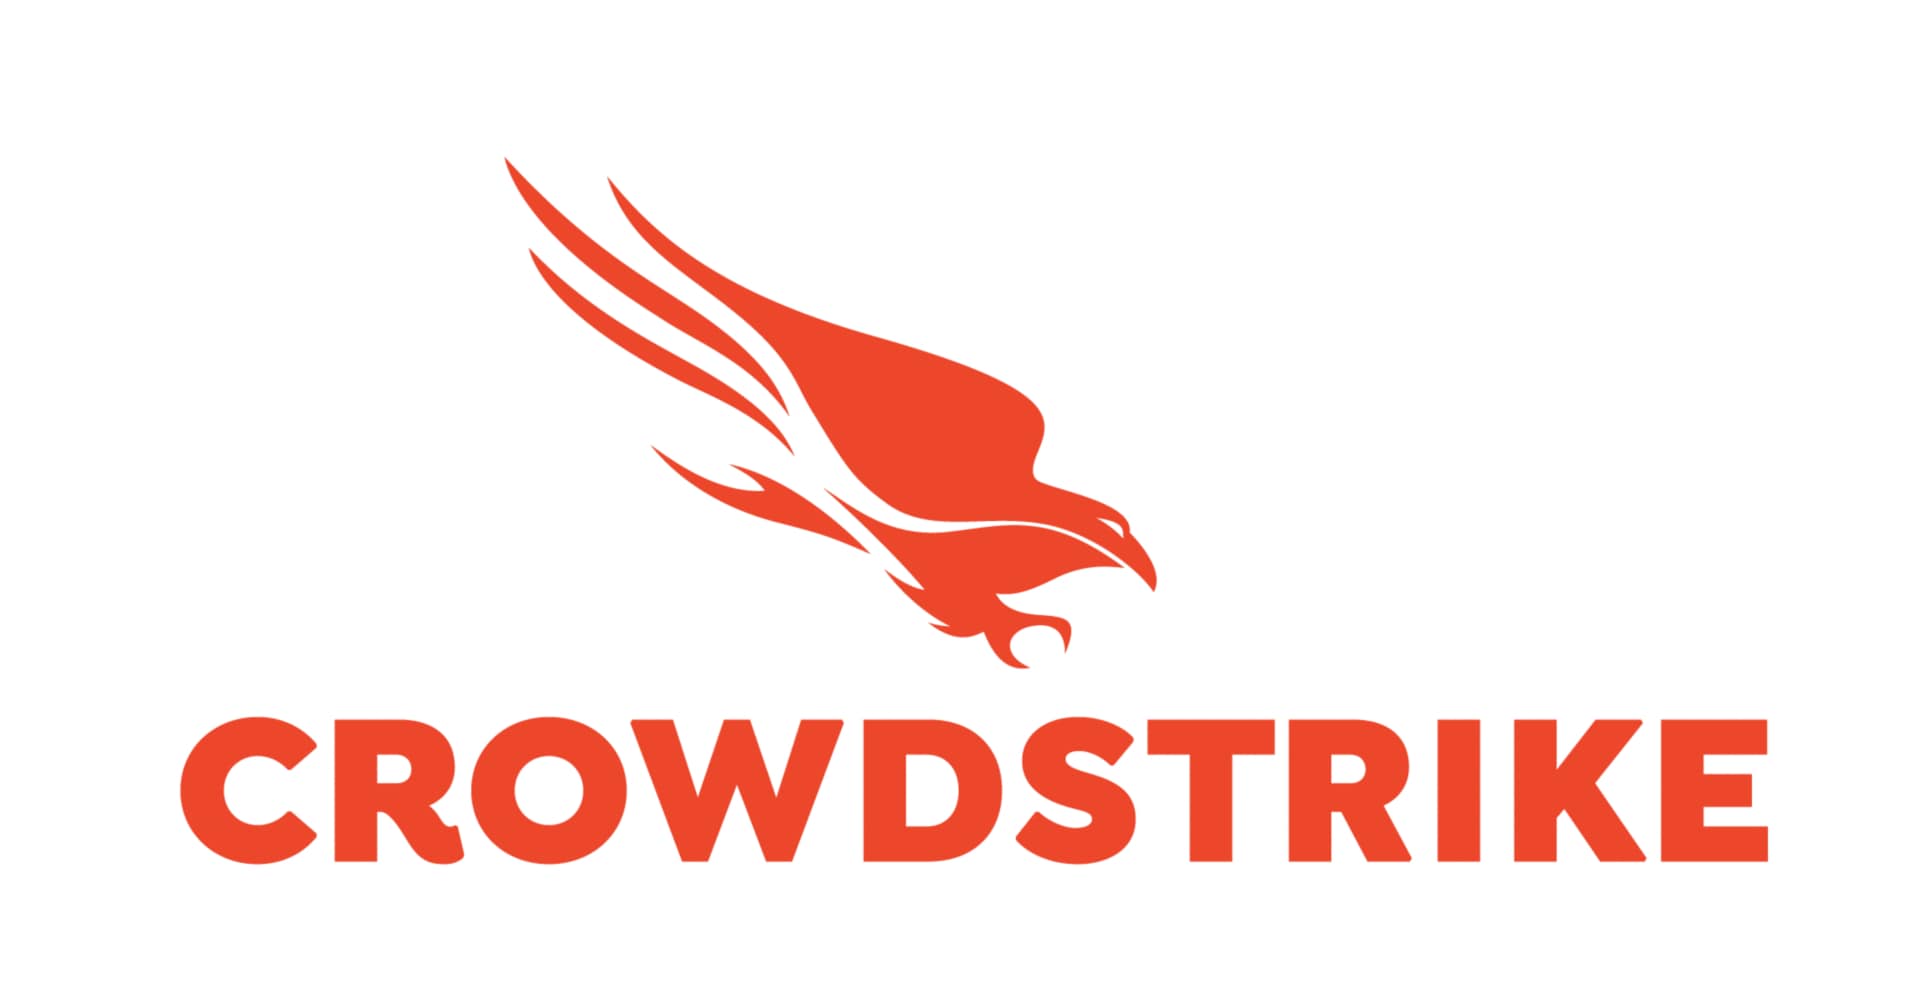 CrowdStrike 36-Month Threat Graph Standard Software Subscription